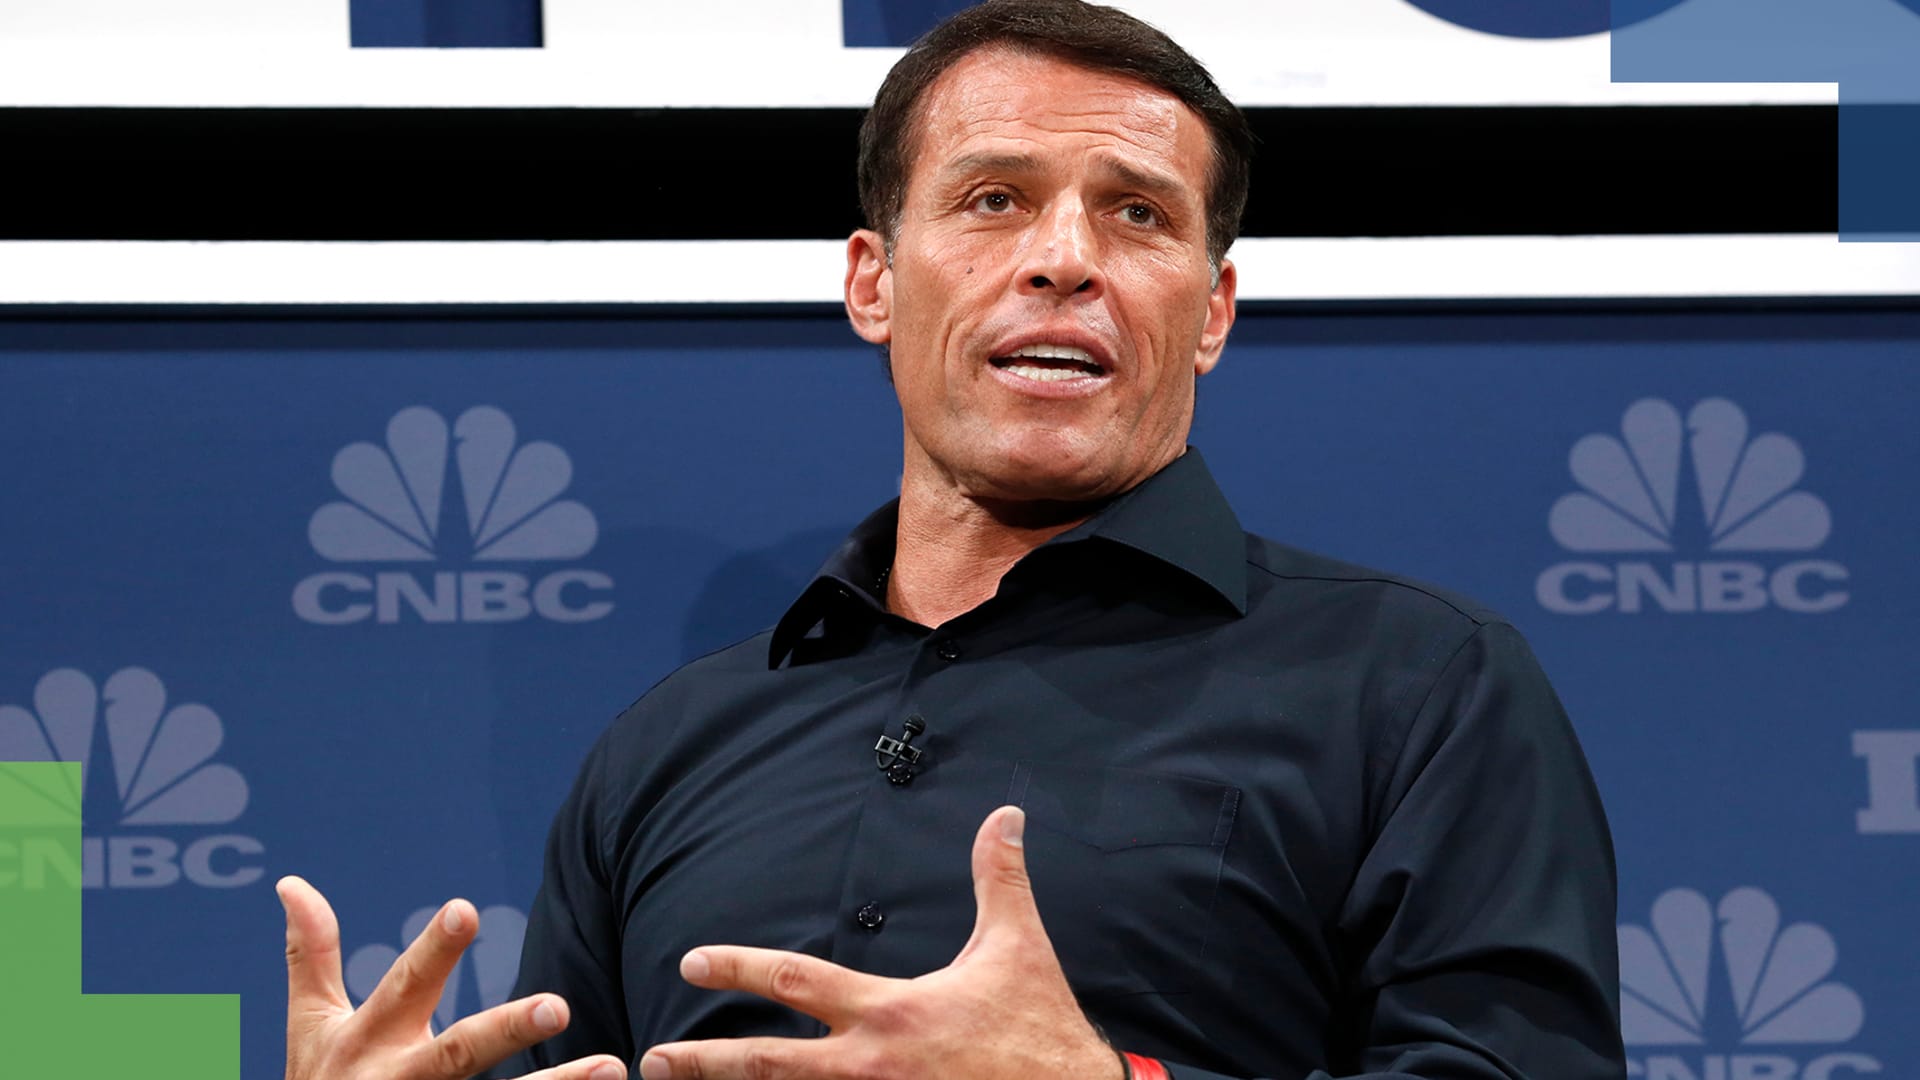 Tony Robbins: This is the secret to happiness in one word